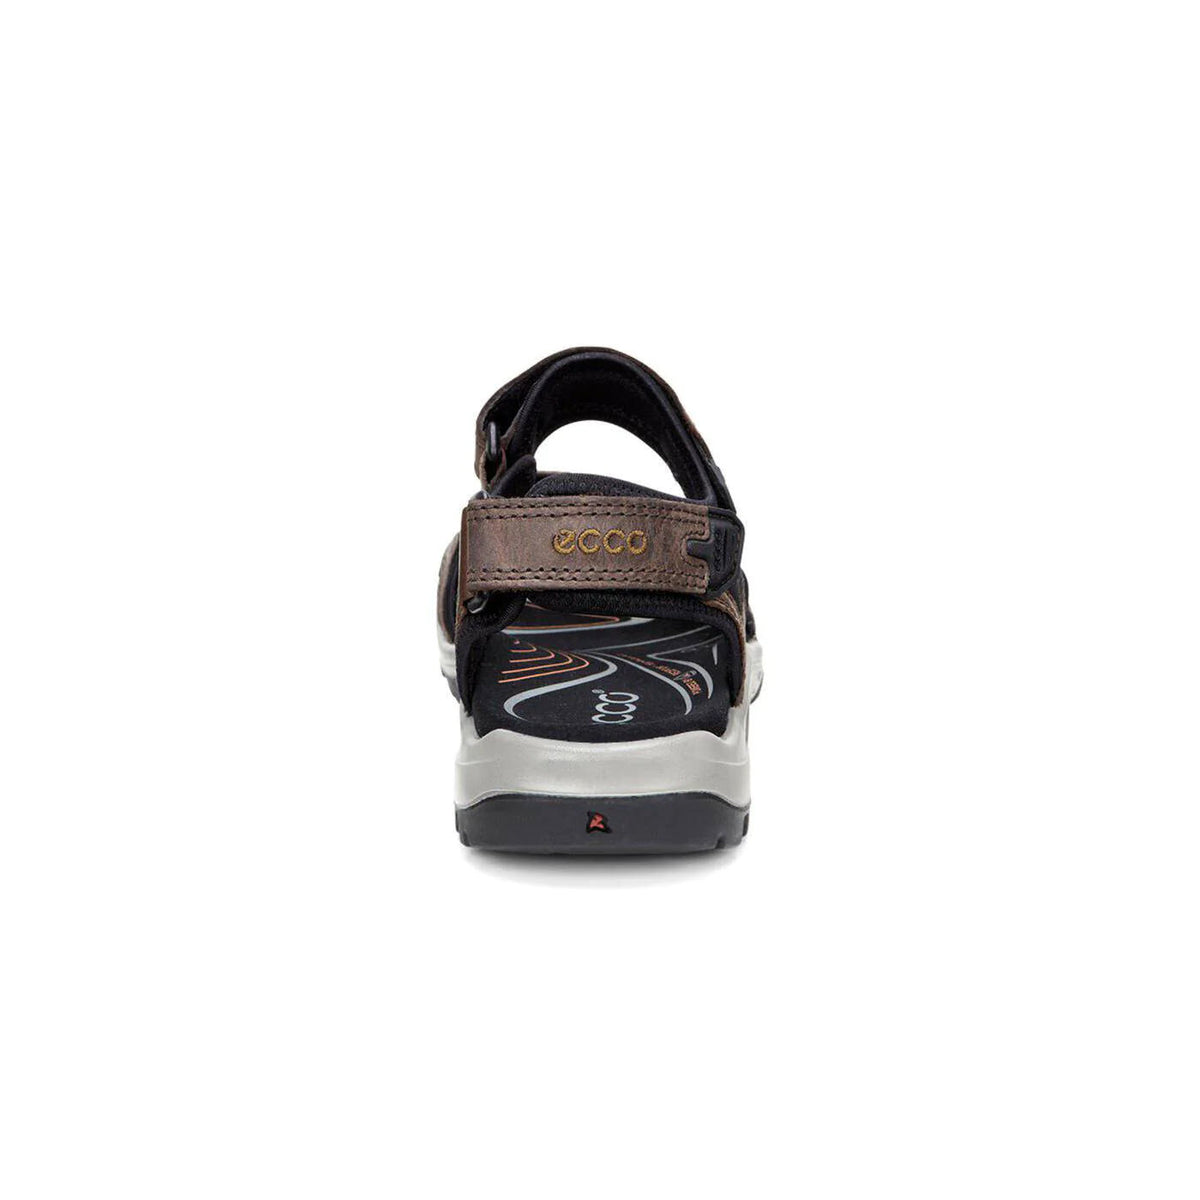 Rear view of a black and brown Ecco Yucatan men&#39;s sandal with adjustable hook and loop straps and a white sole.